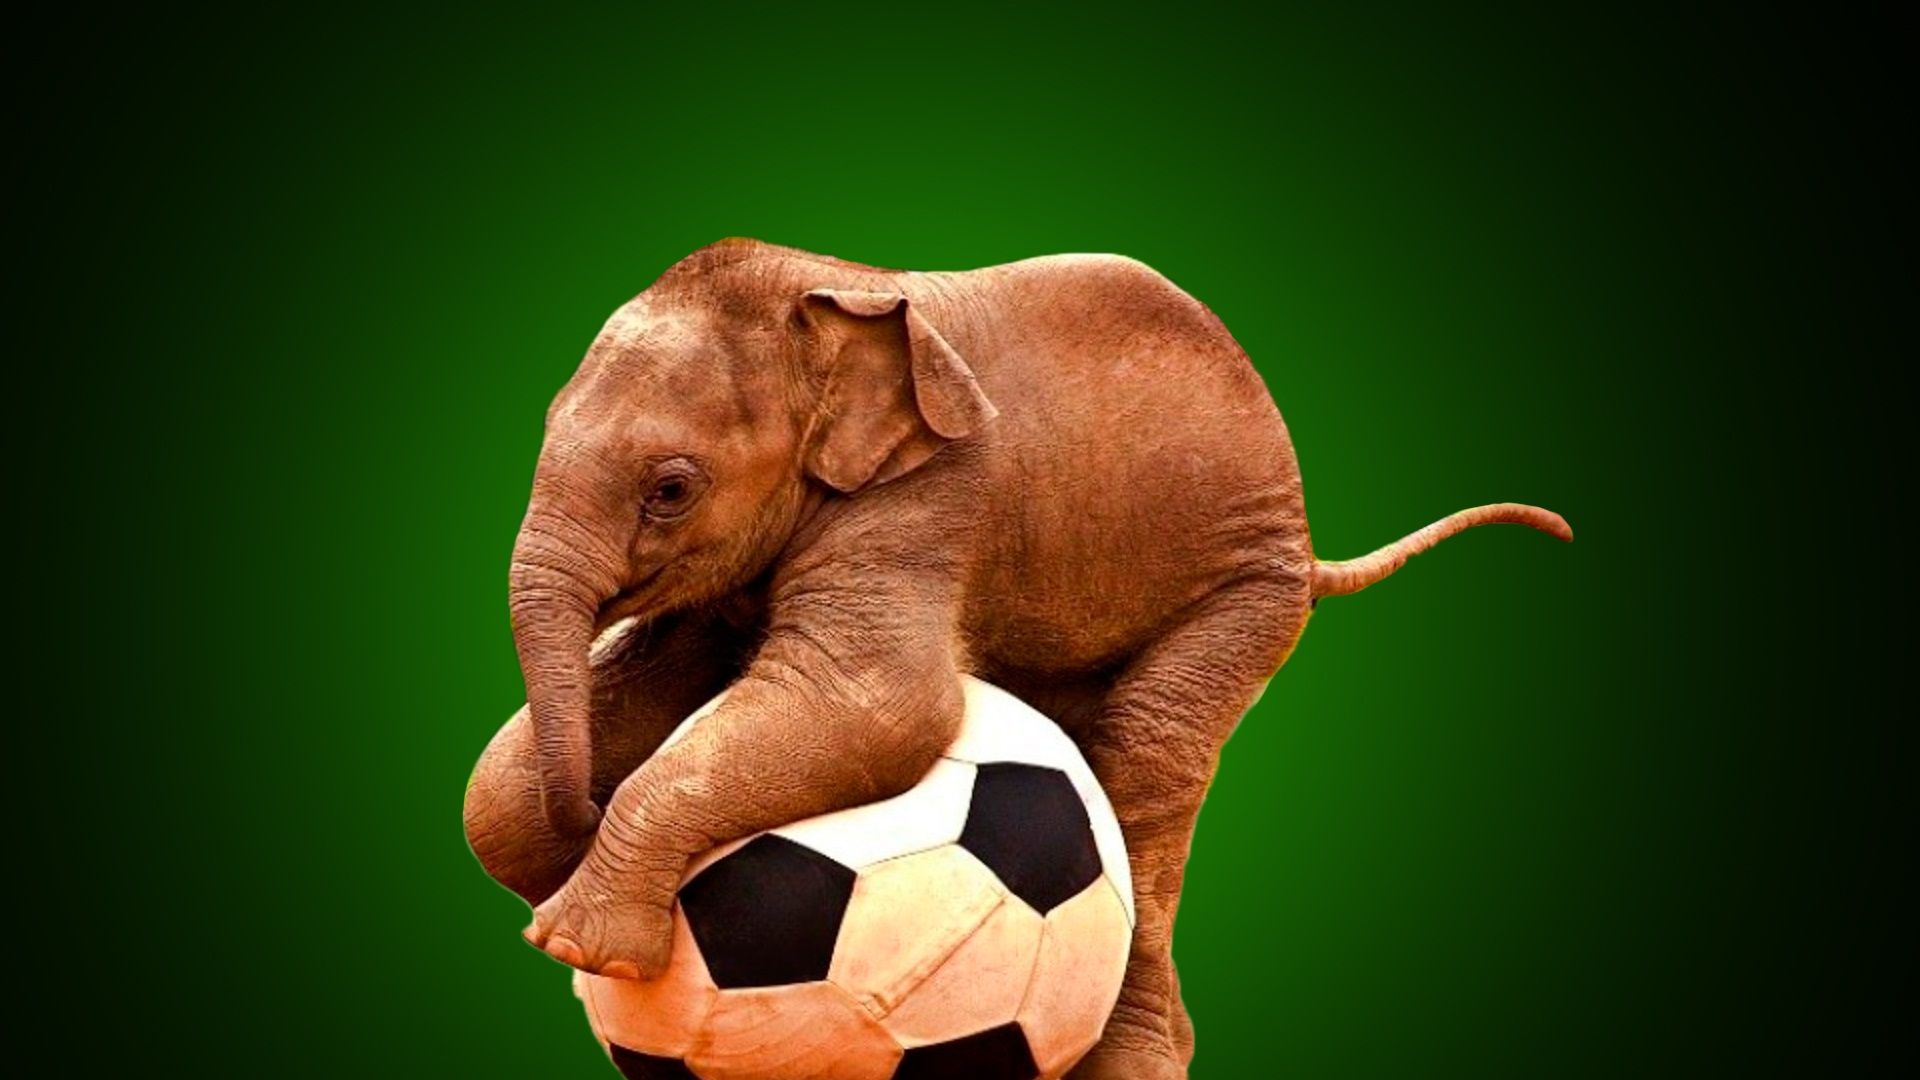 Elephant playing with ball very funny | Beautiful hd wallpaper